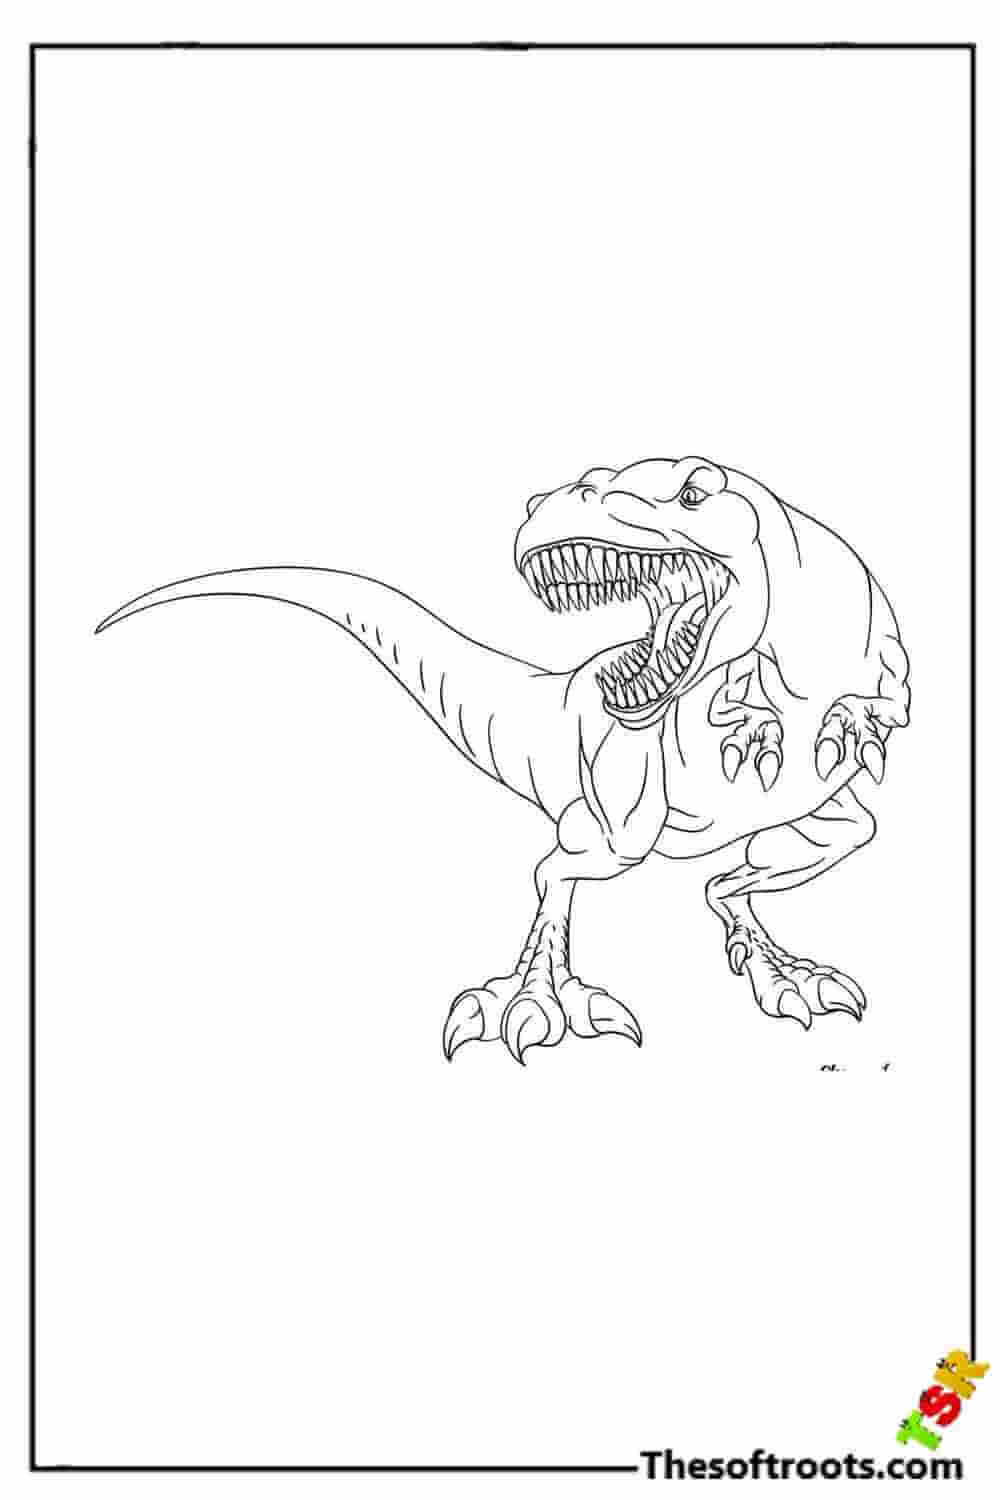 Tyrannosaurus Rex coloring pages